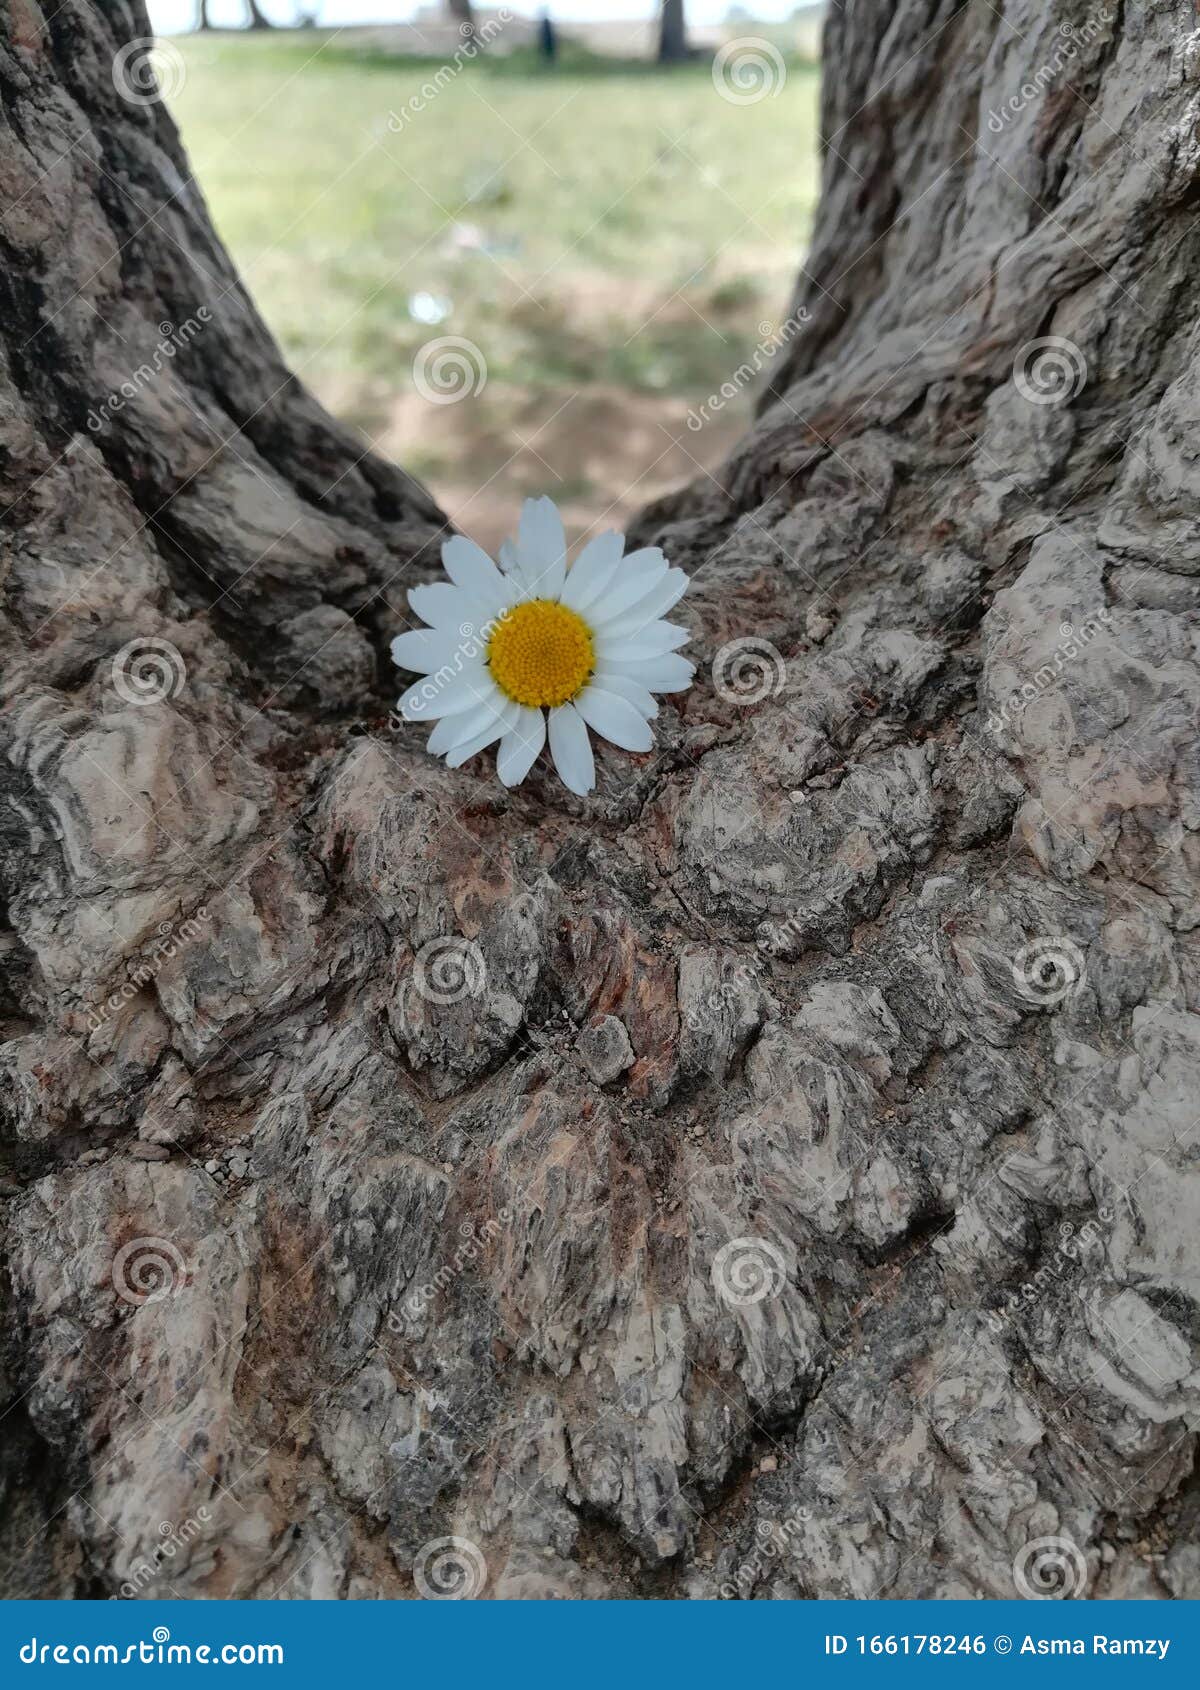 shooting a white rose on the tree